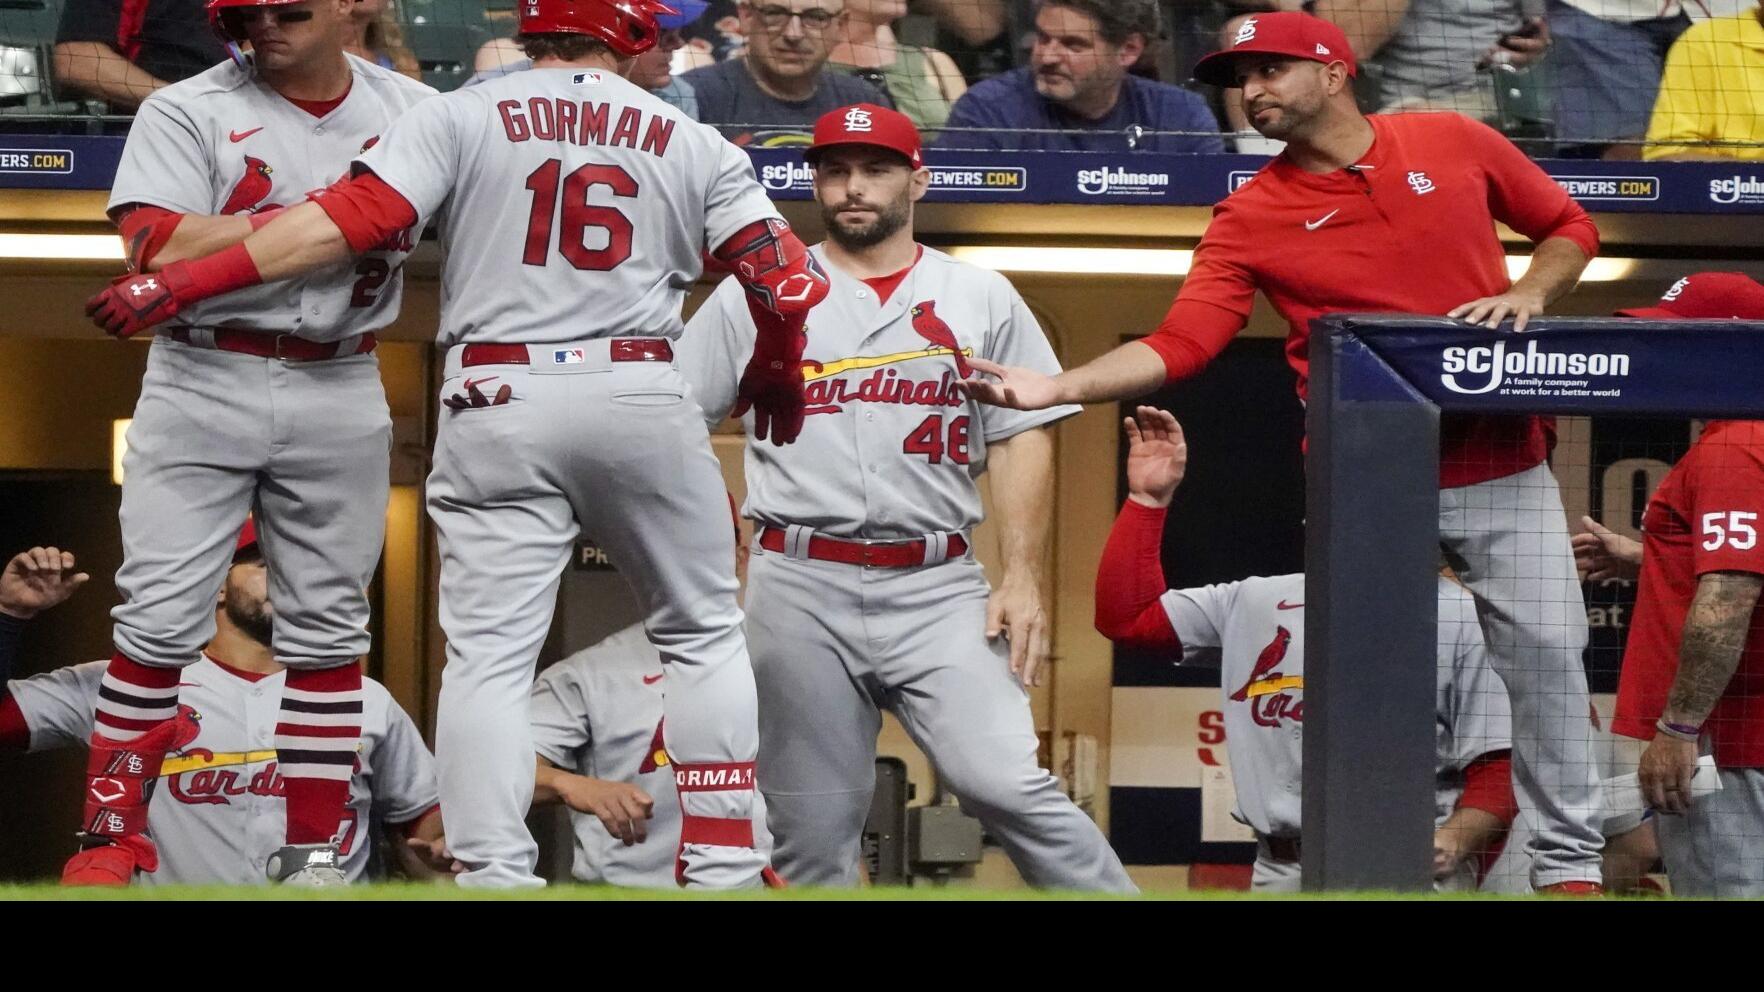 Cardinals Quick Hits: Gorman has a blast, launches Cardinals, Flaherty past Brewers